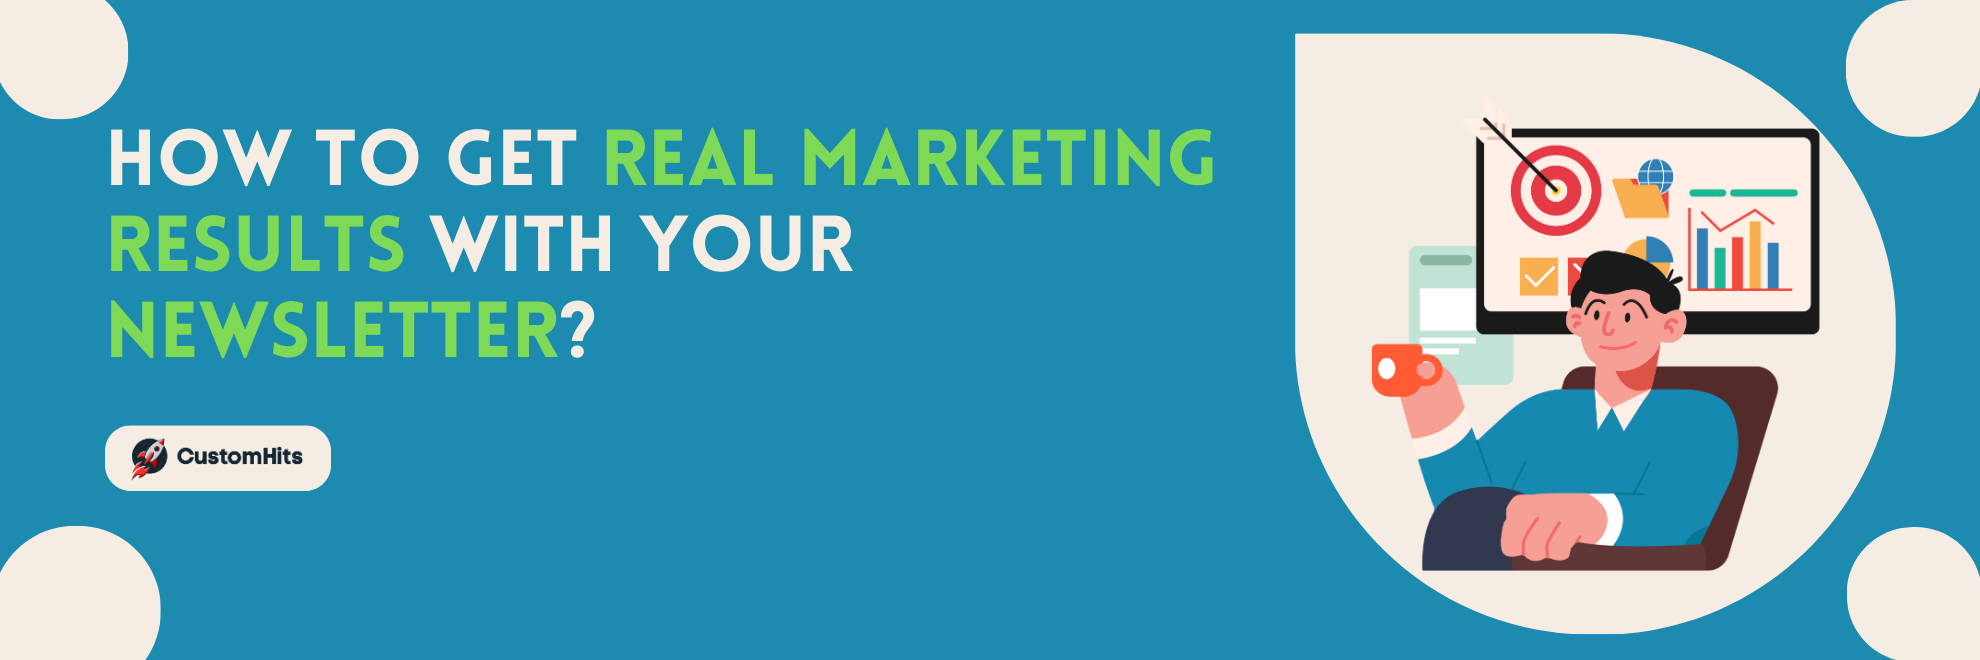 How to get real marketing results with your newsletter?